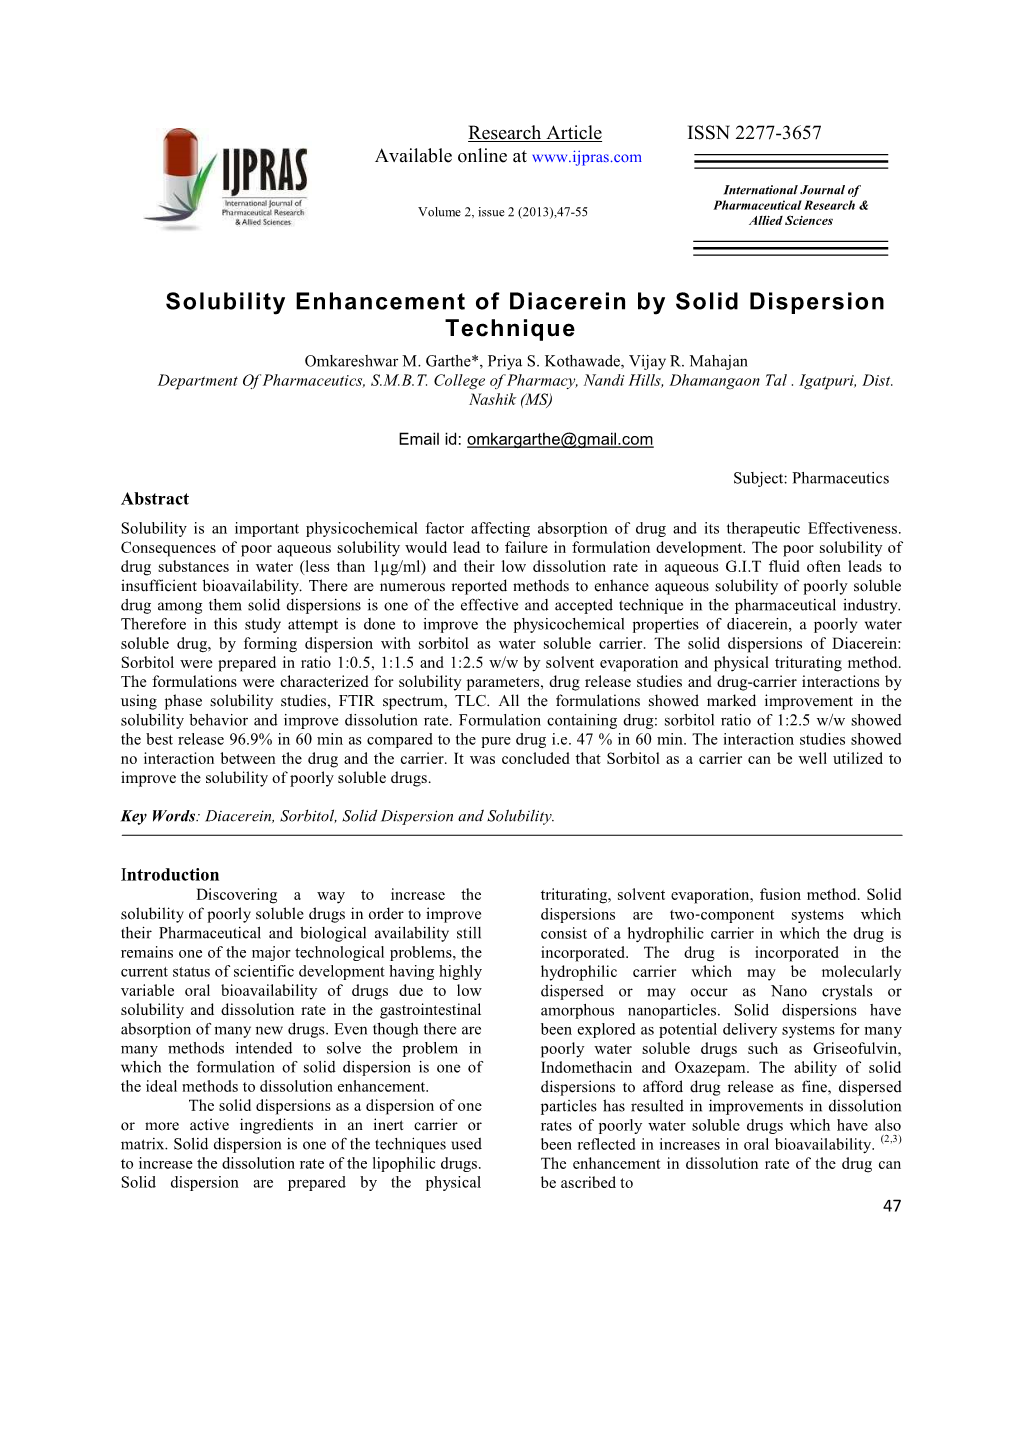 Solubility Enhancement of Diacerein by Solid Dispersion Technique Omkareshwar M